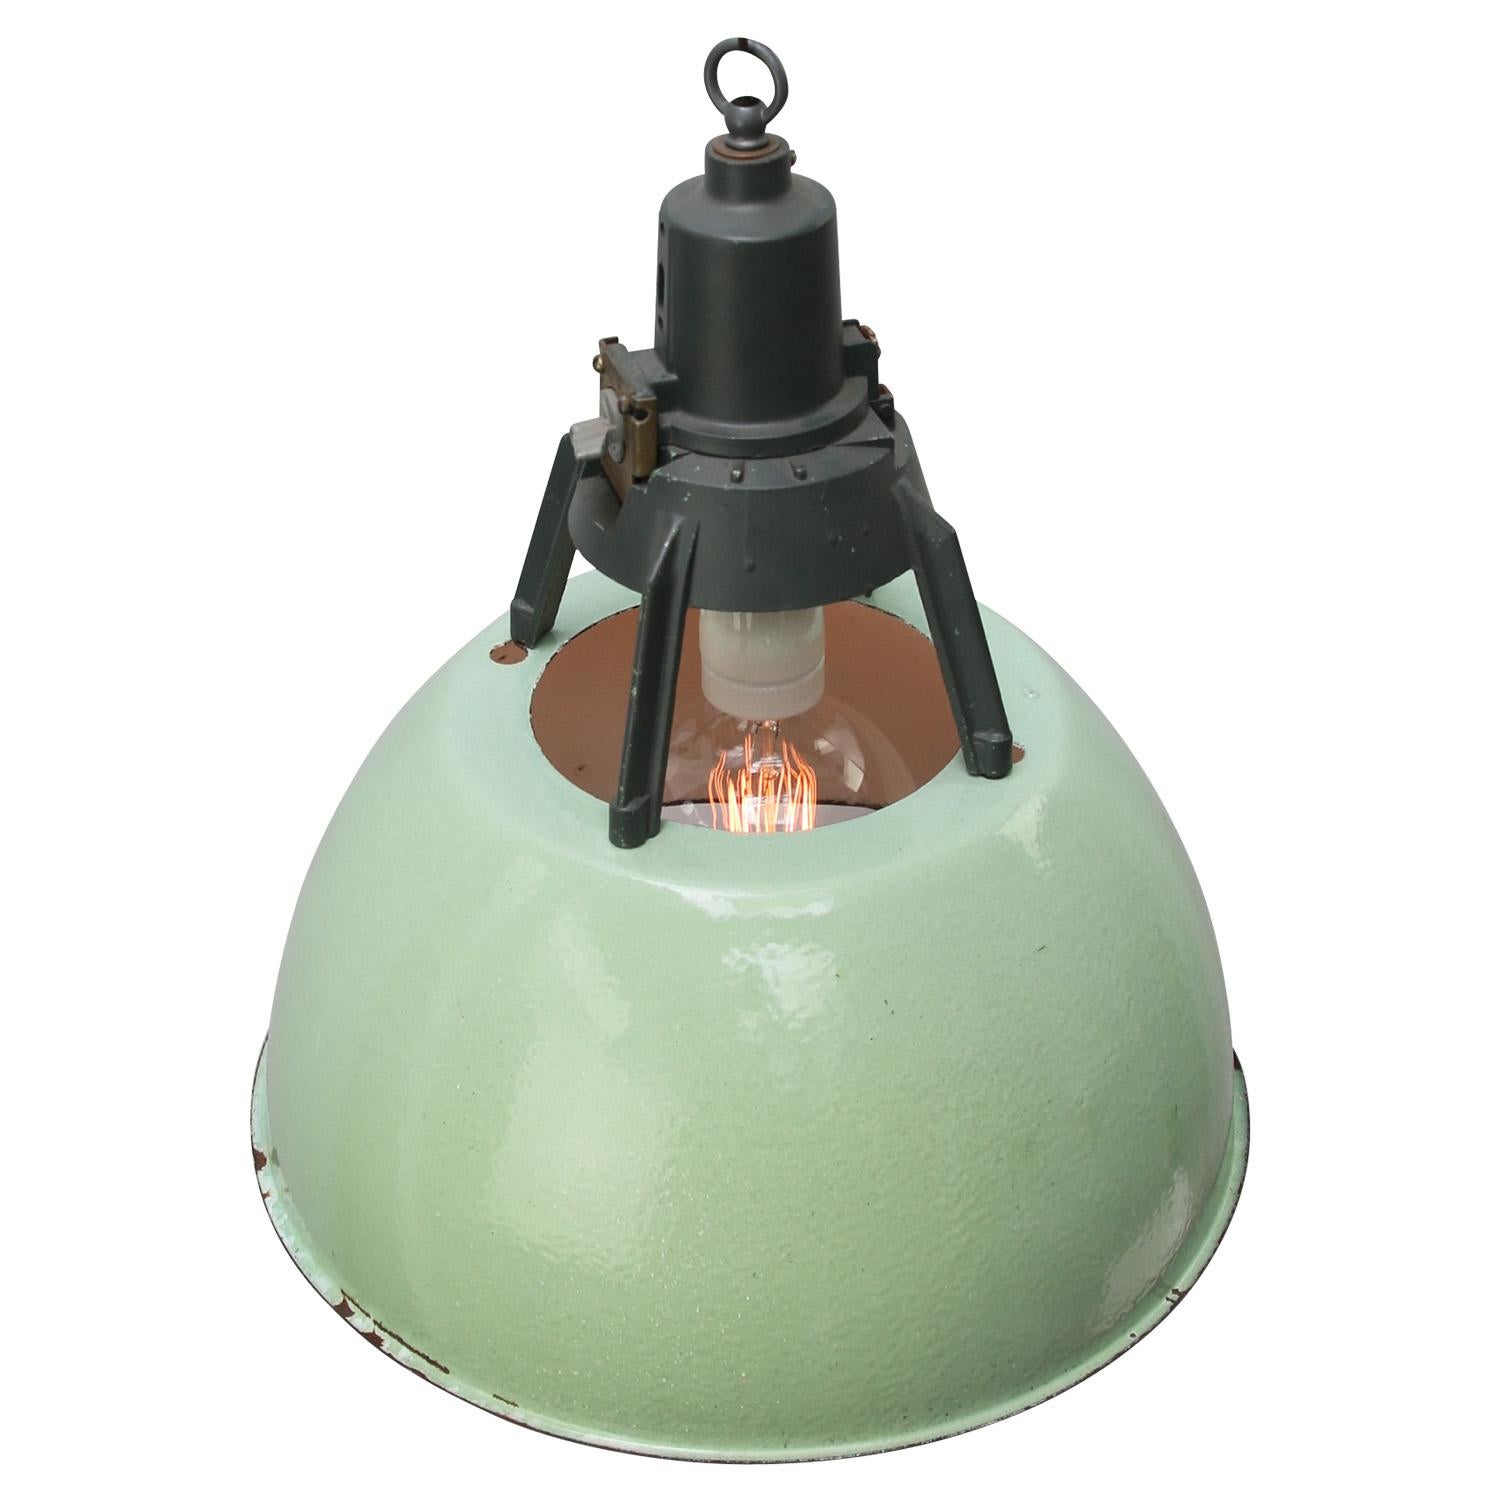 Enamel industrial pendant.
Green enamel shade, white inside.
Dark grey cast aluminum top.

Weight: 2.90 kg / 6.4 lb

Priced per individual item. All lamps have been made suitable by international standards for incandescent light bulbs,